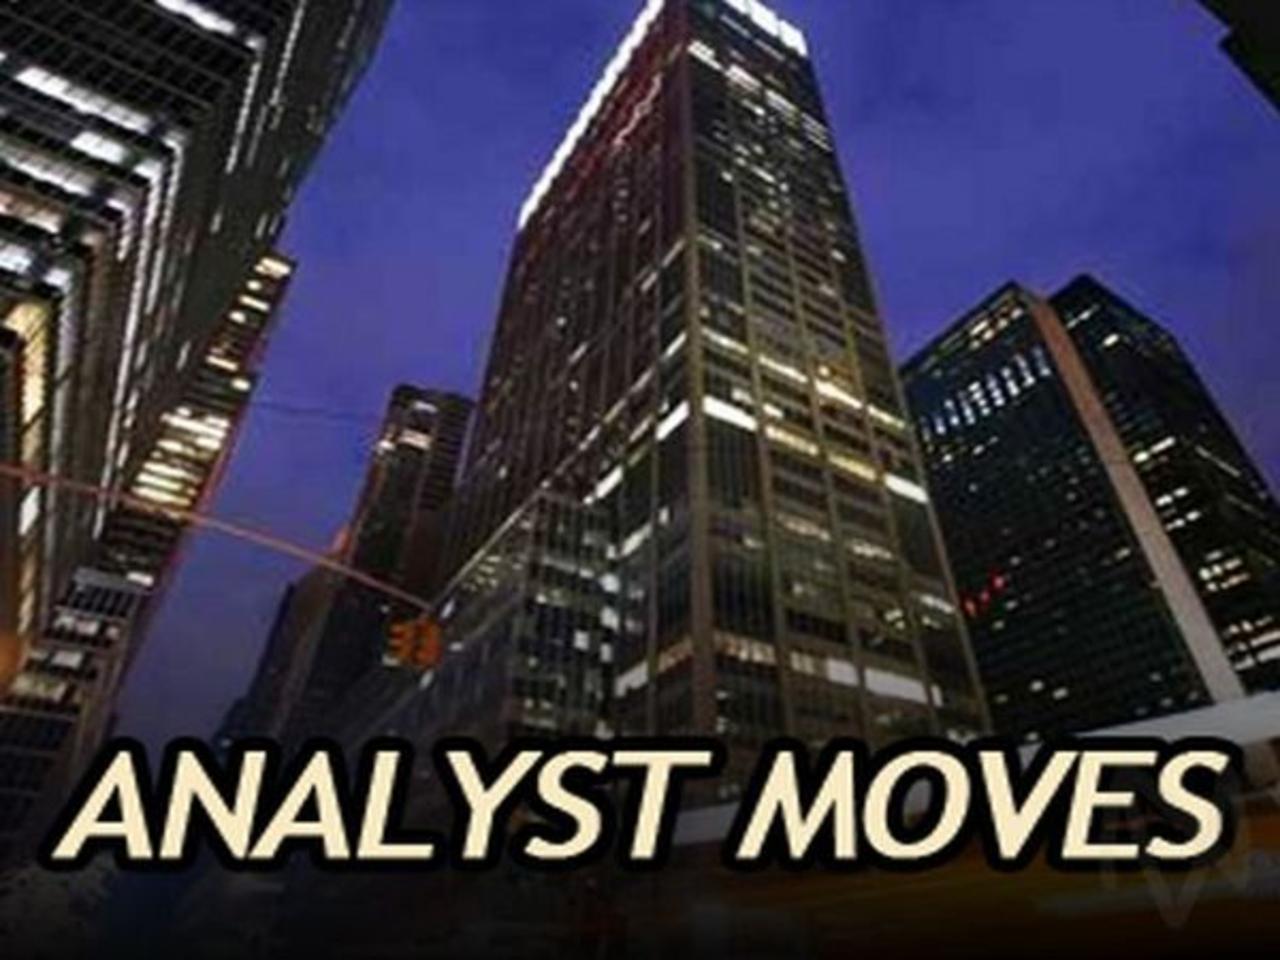 Dow Analyst Moves: MSFT